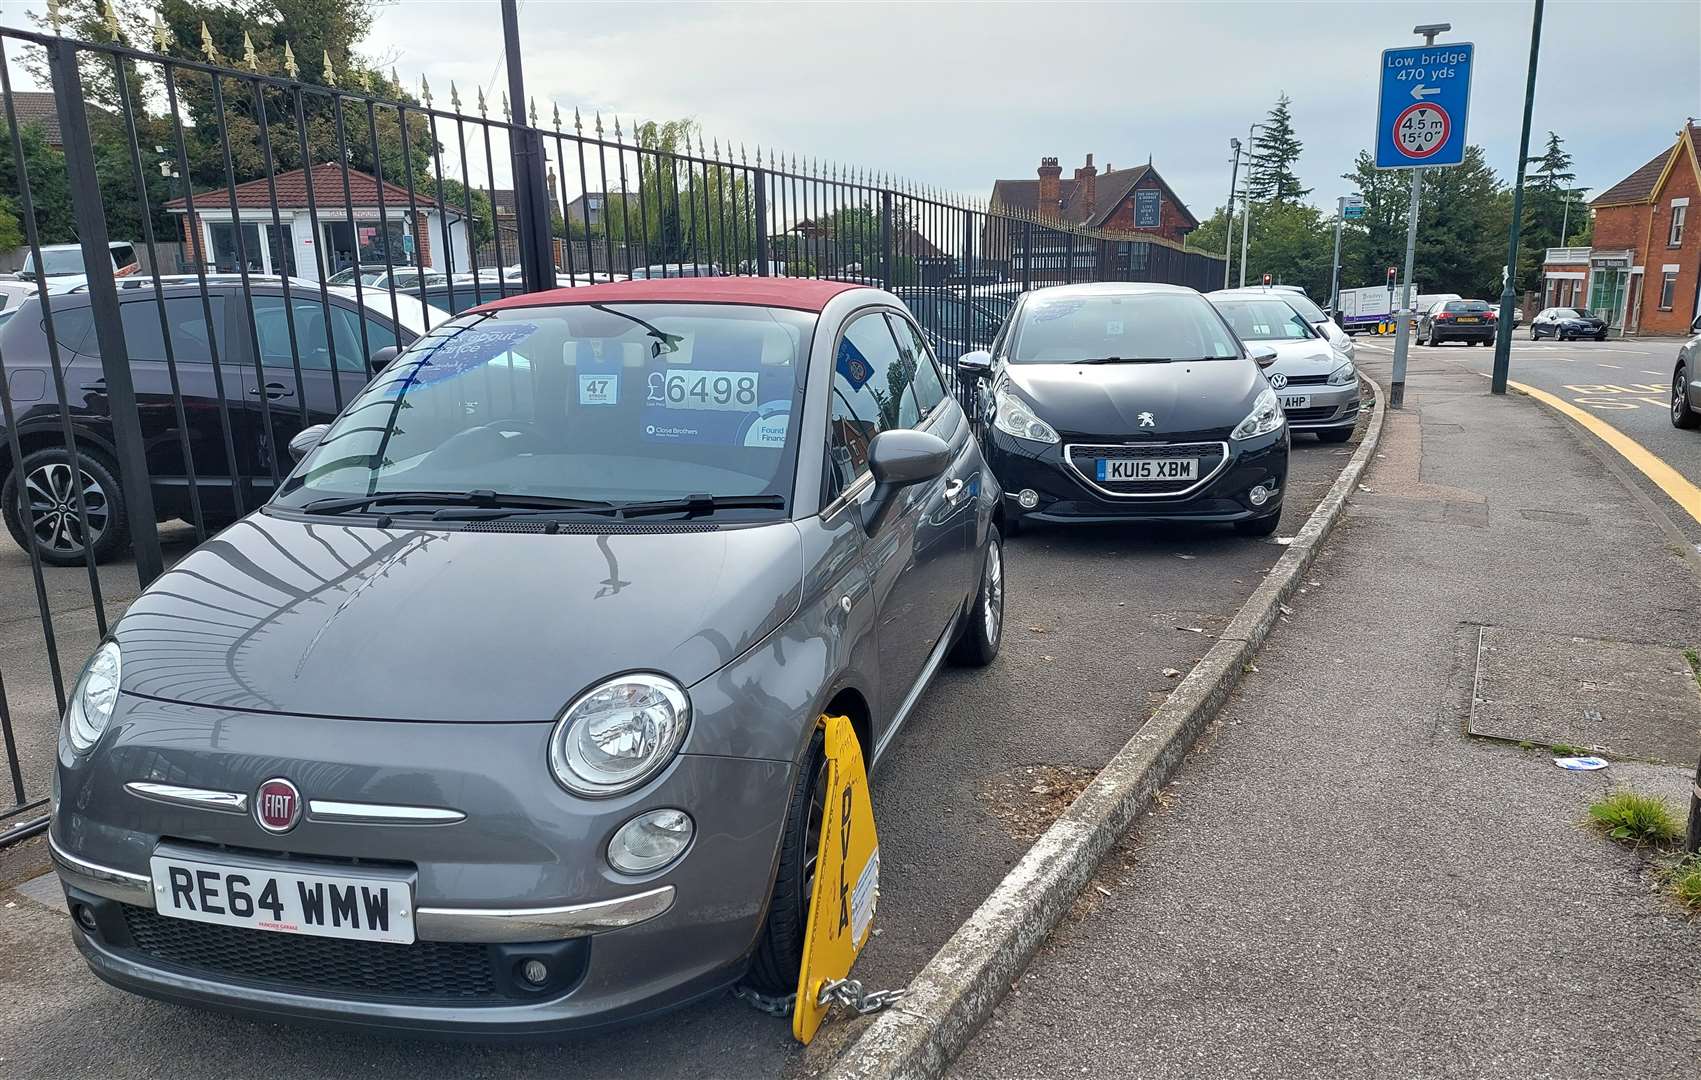 A Fiat 500 has been clamped at the car dealership. Picture: Max Mannouch